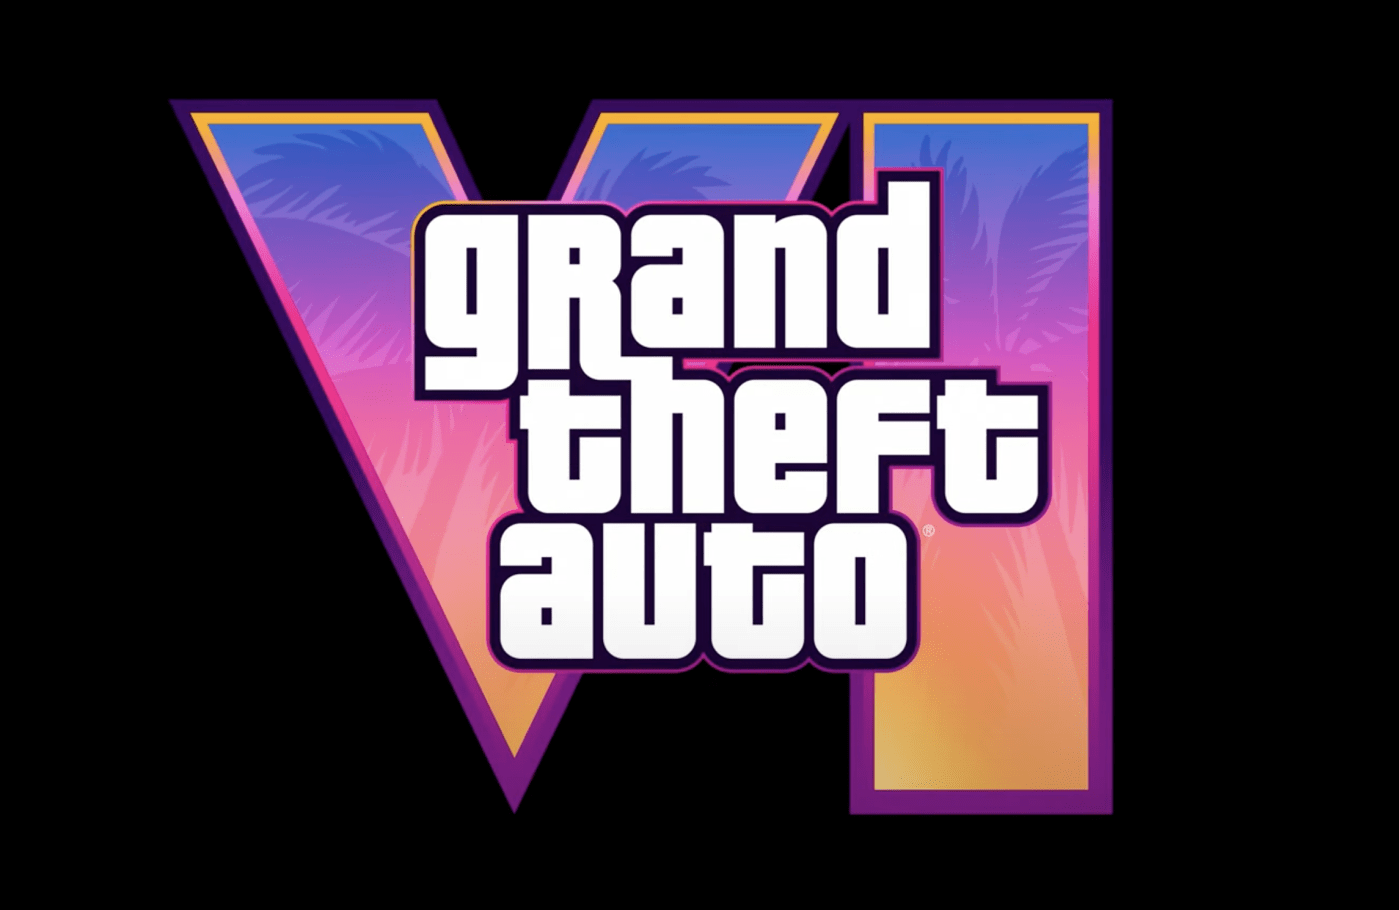 Grand Theft Auto 6 trailer arrives early, but the game won't until 2025